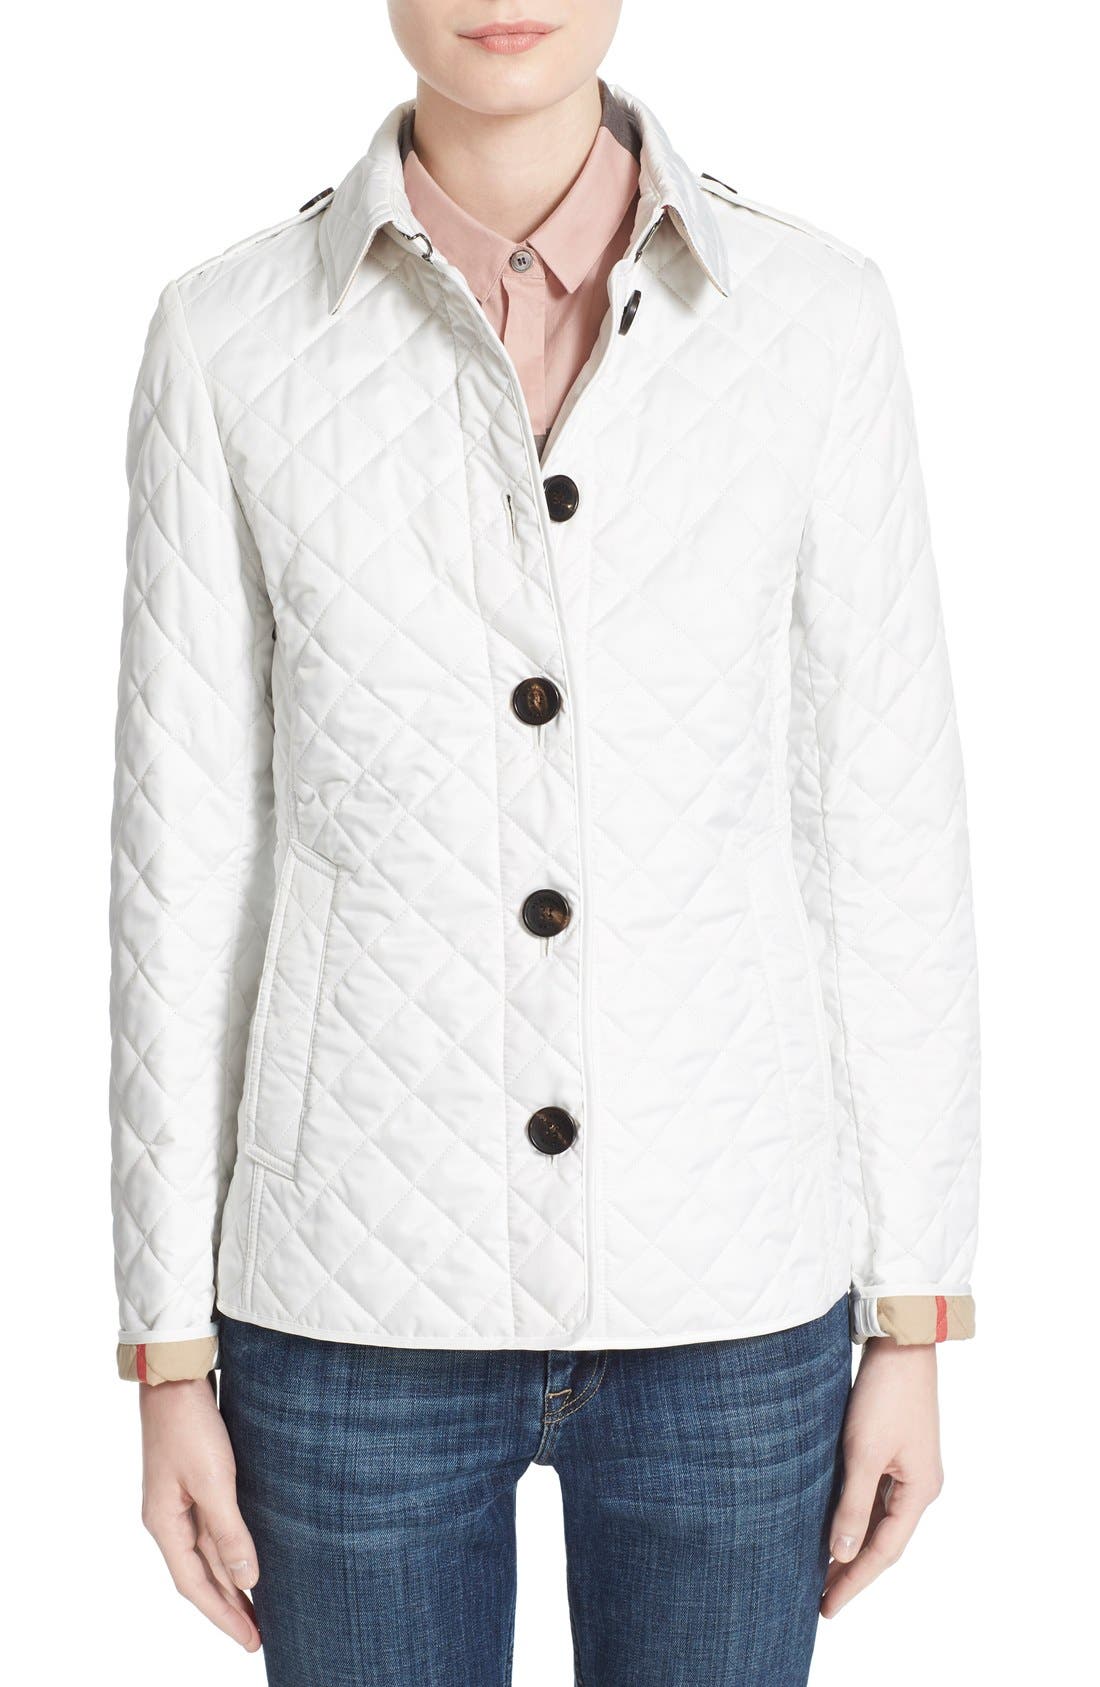 Burberry Brit 'Ashurst' Quilted Jacket 